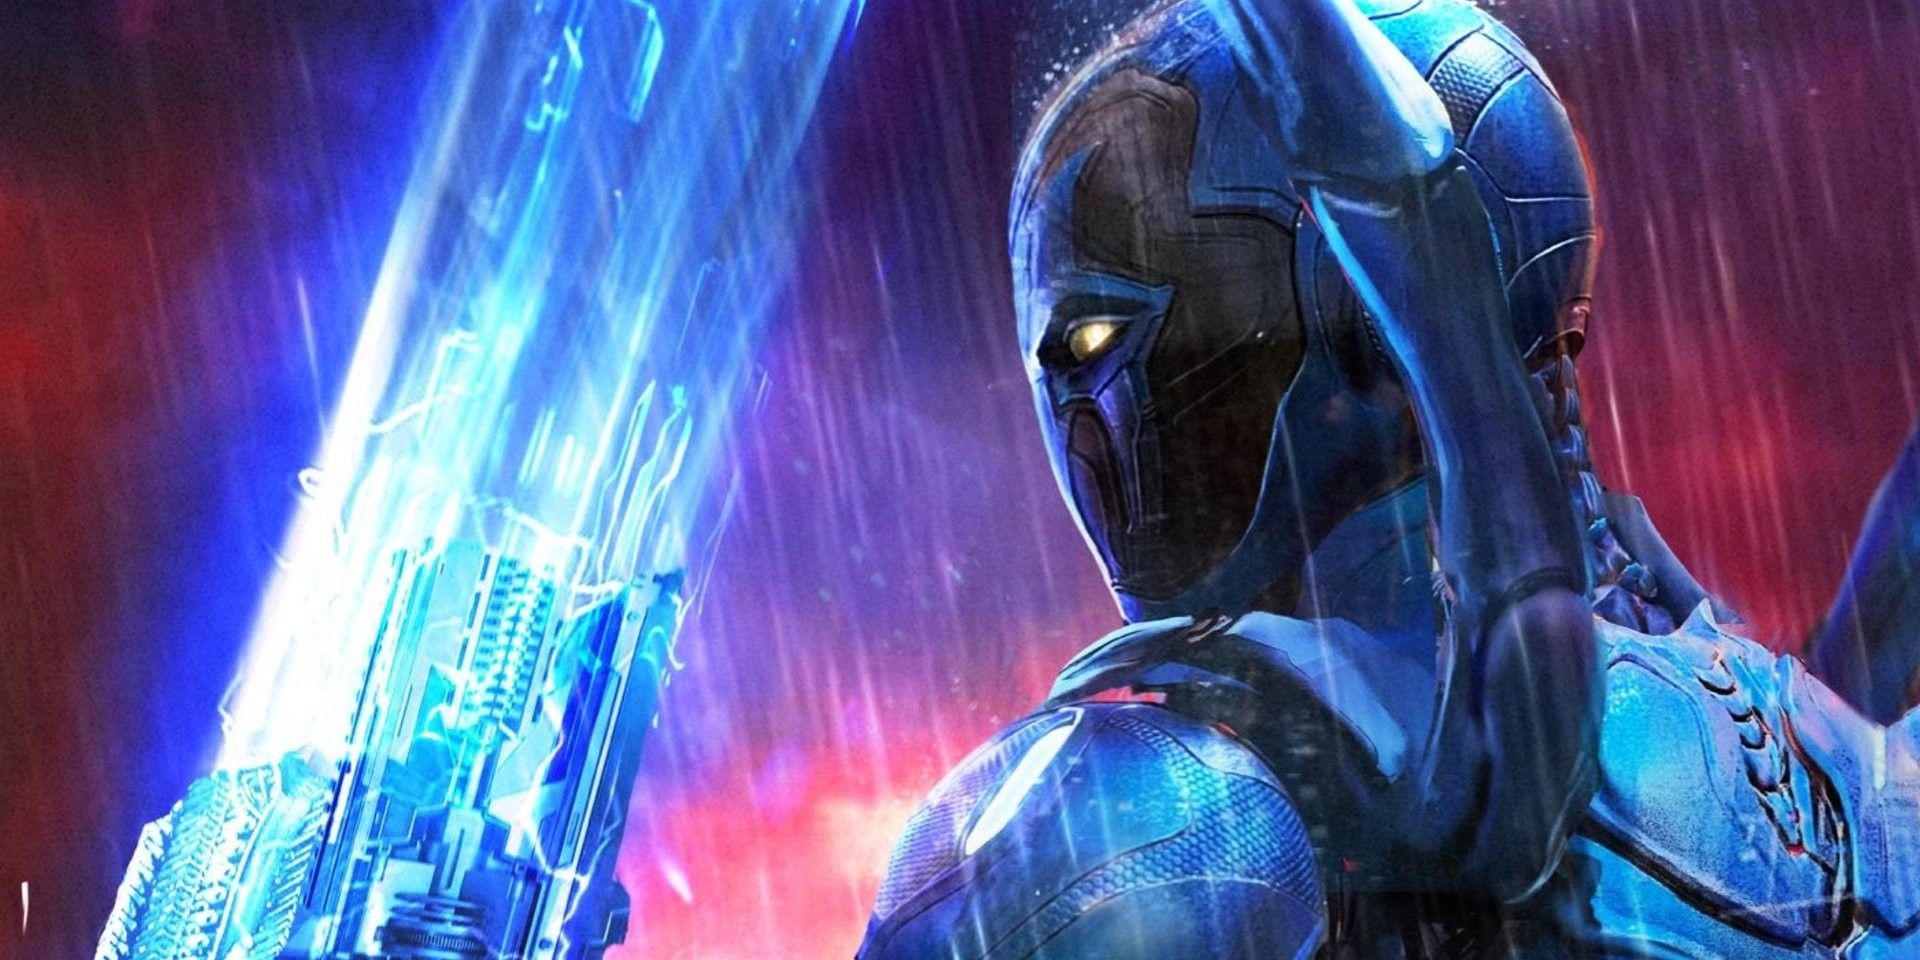 Shot of Blue Beetle from the back, with his energy sword out and rain falling.